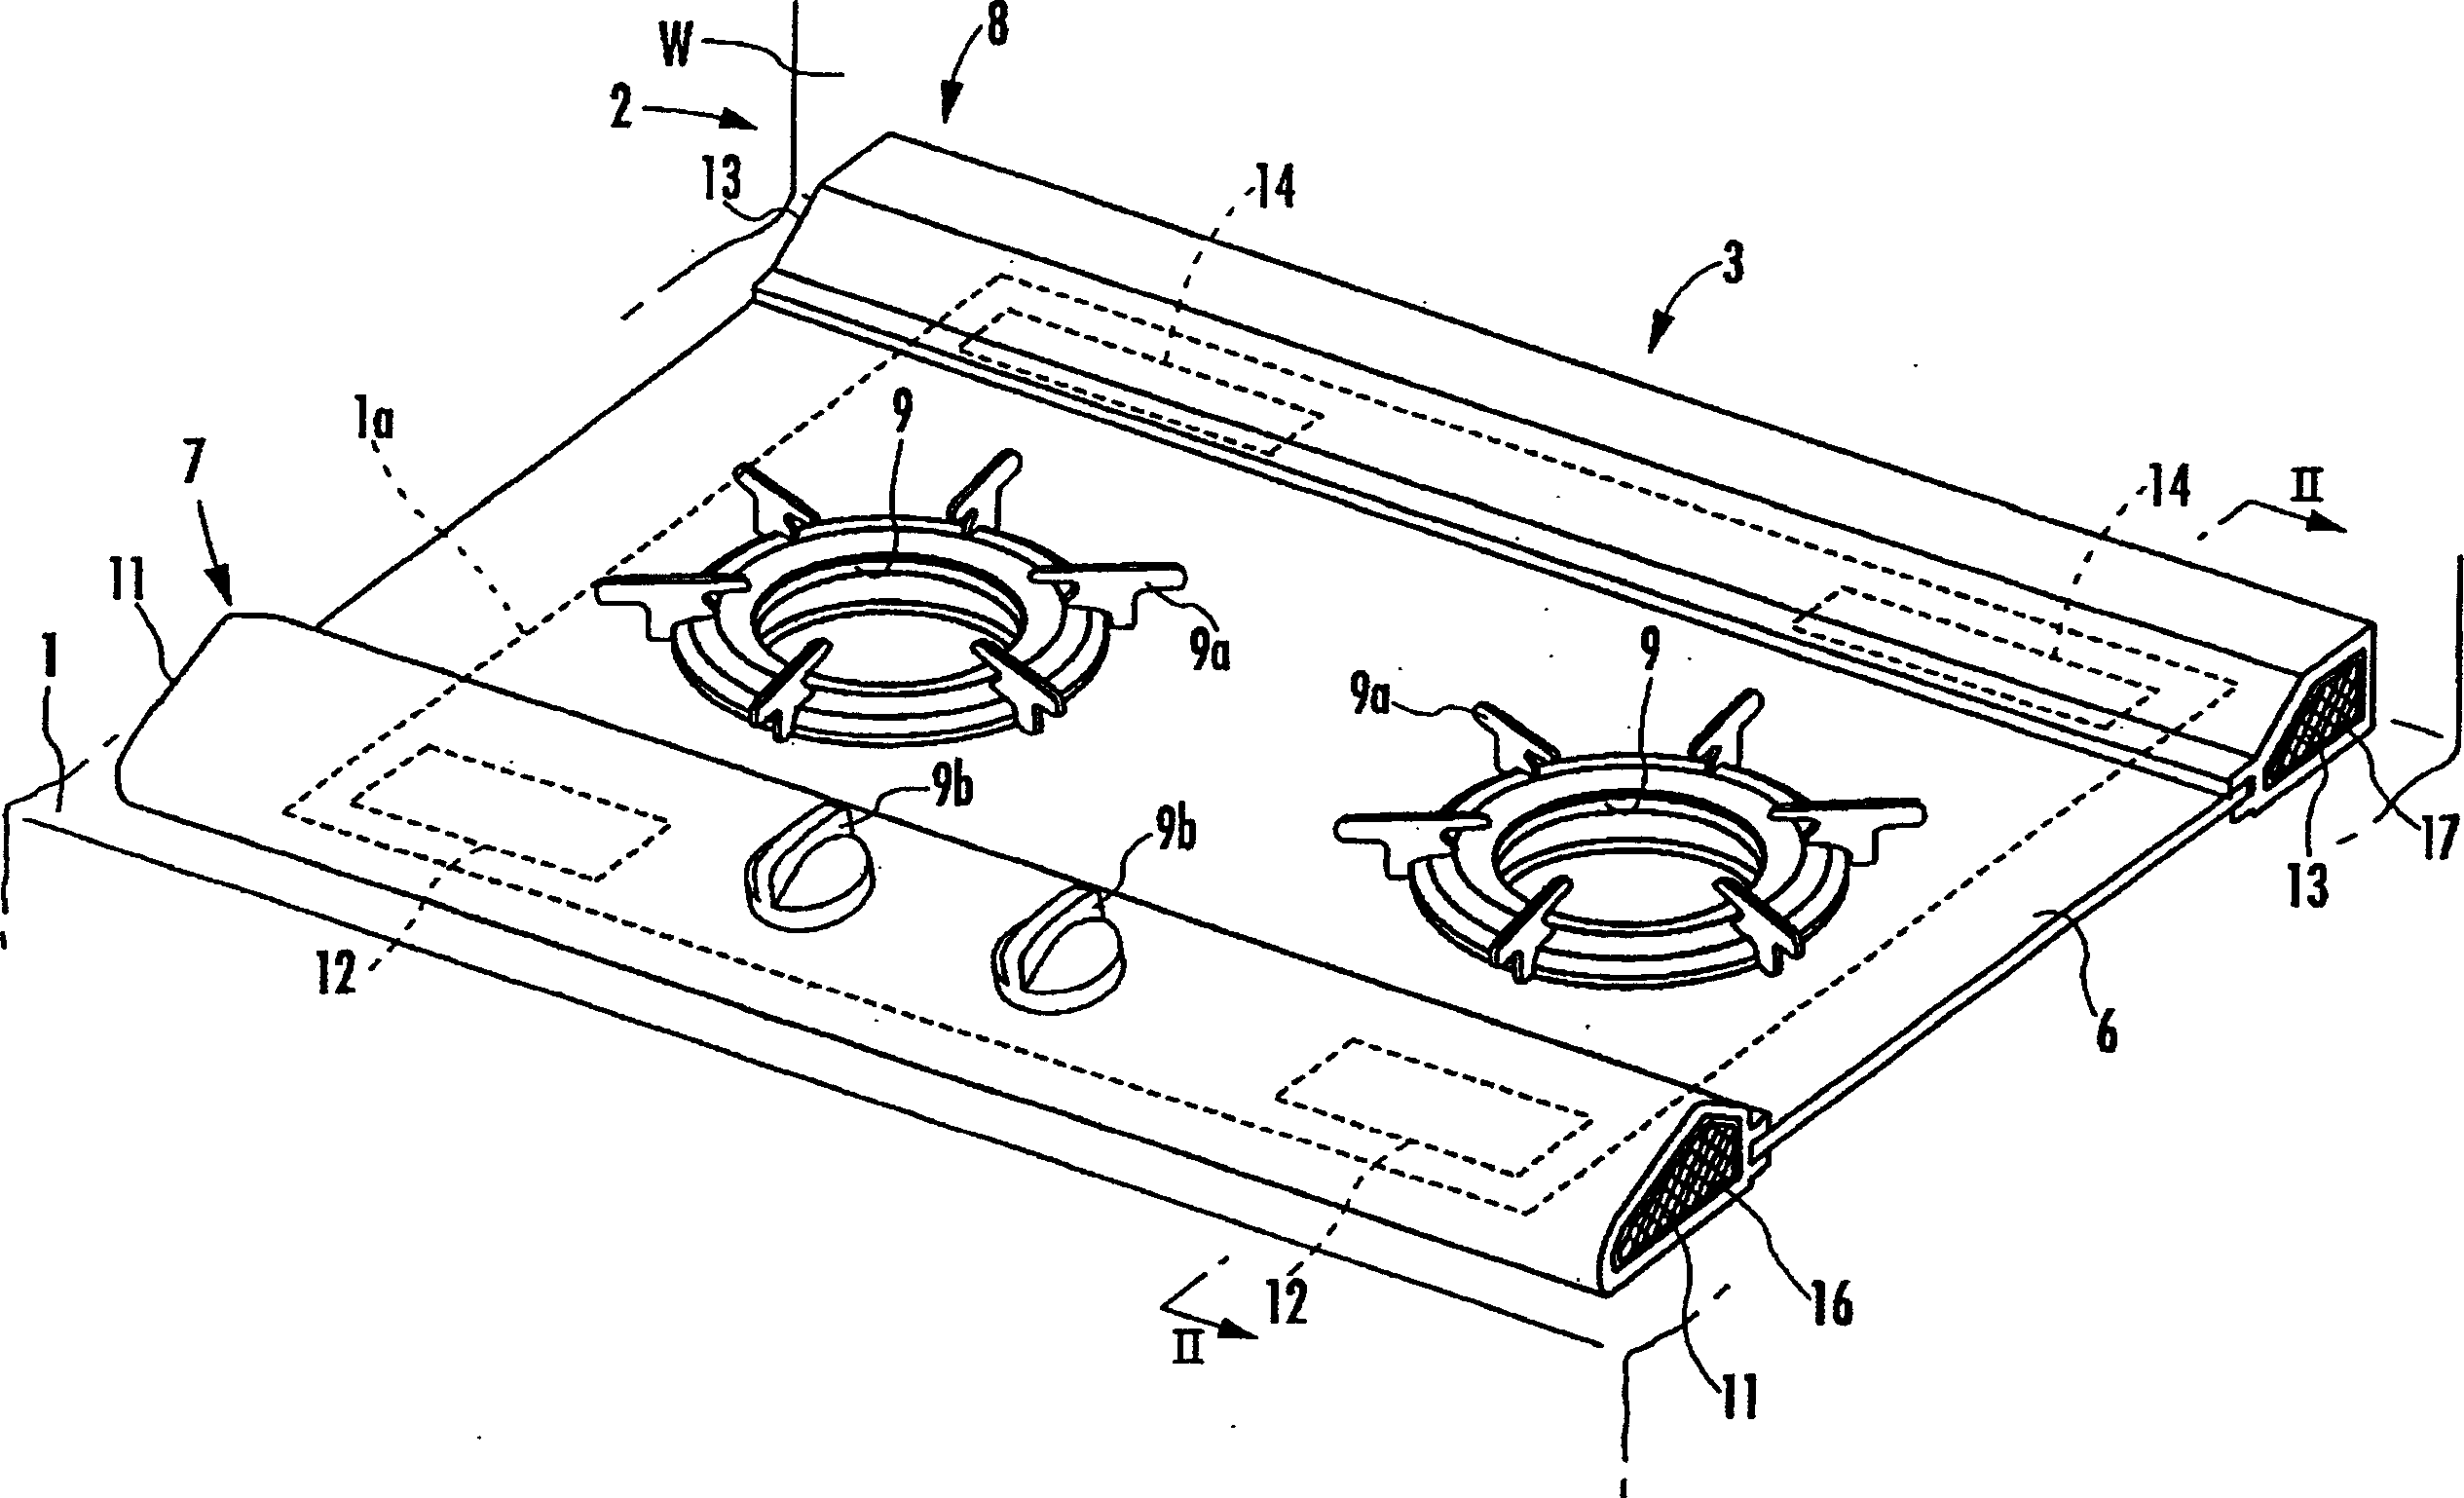 Glass top plate for drop-in type cooking stove